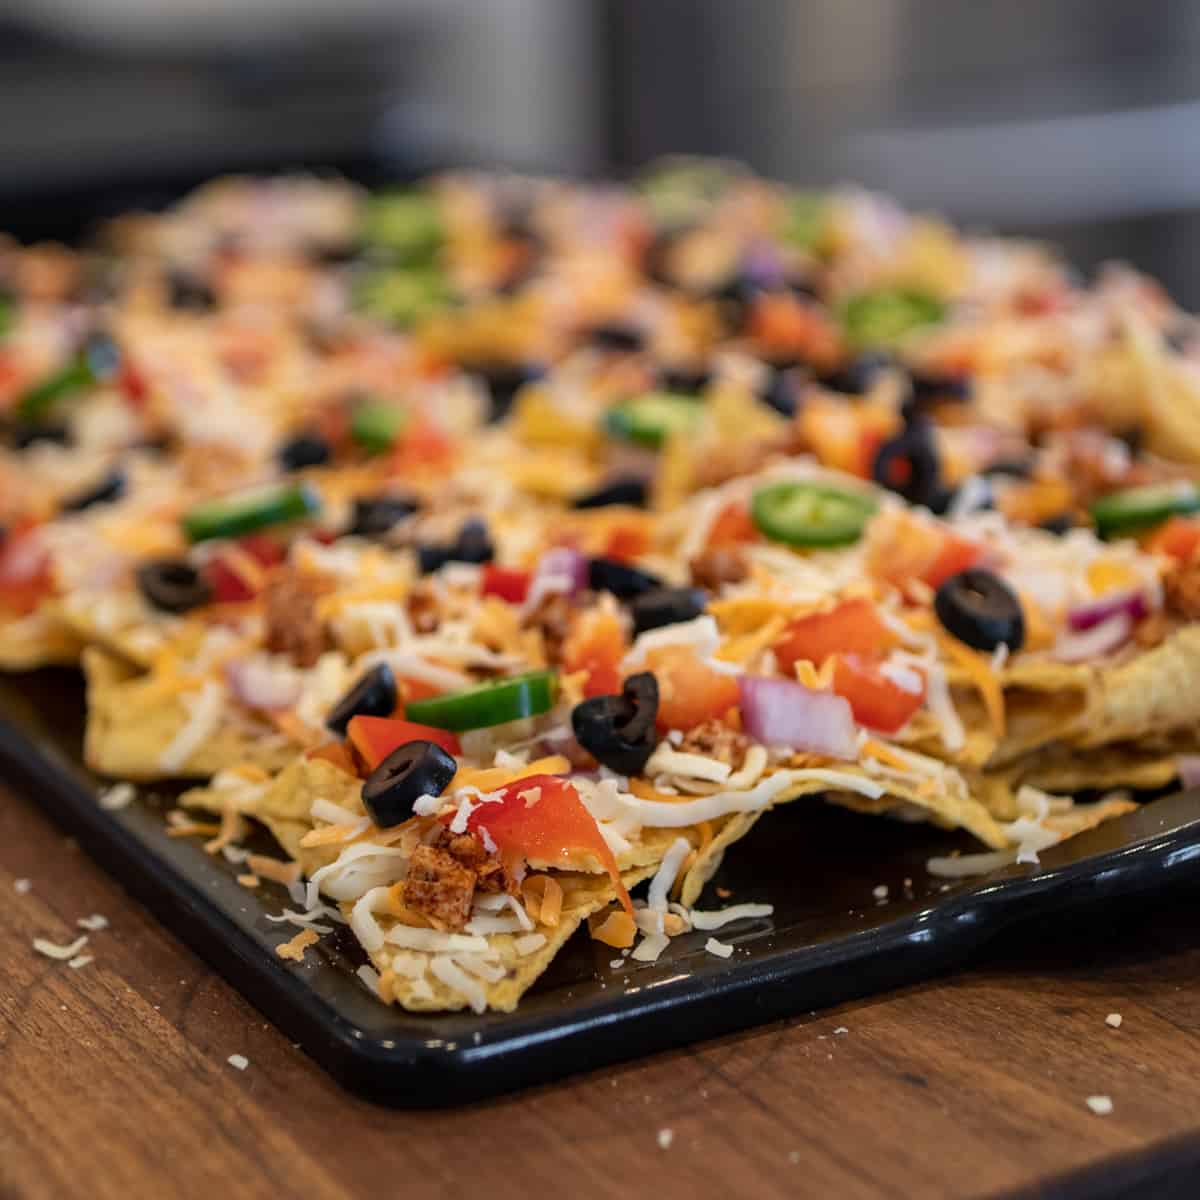 A close up of a tray of nachos that have not gone into the oven.